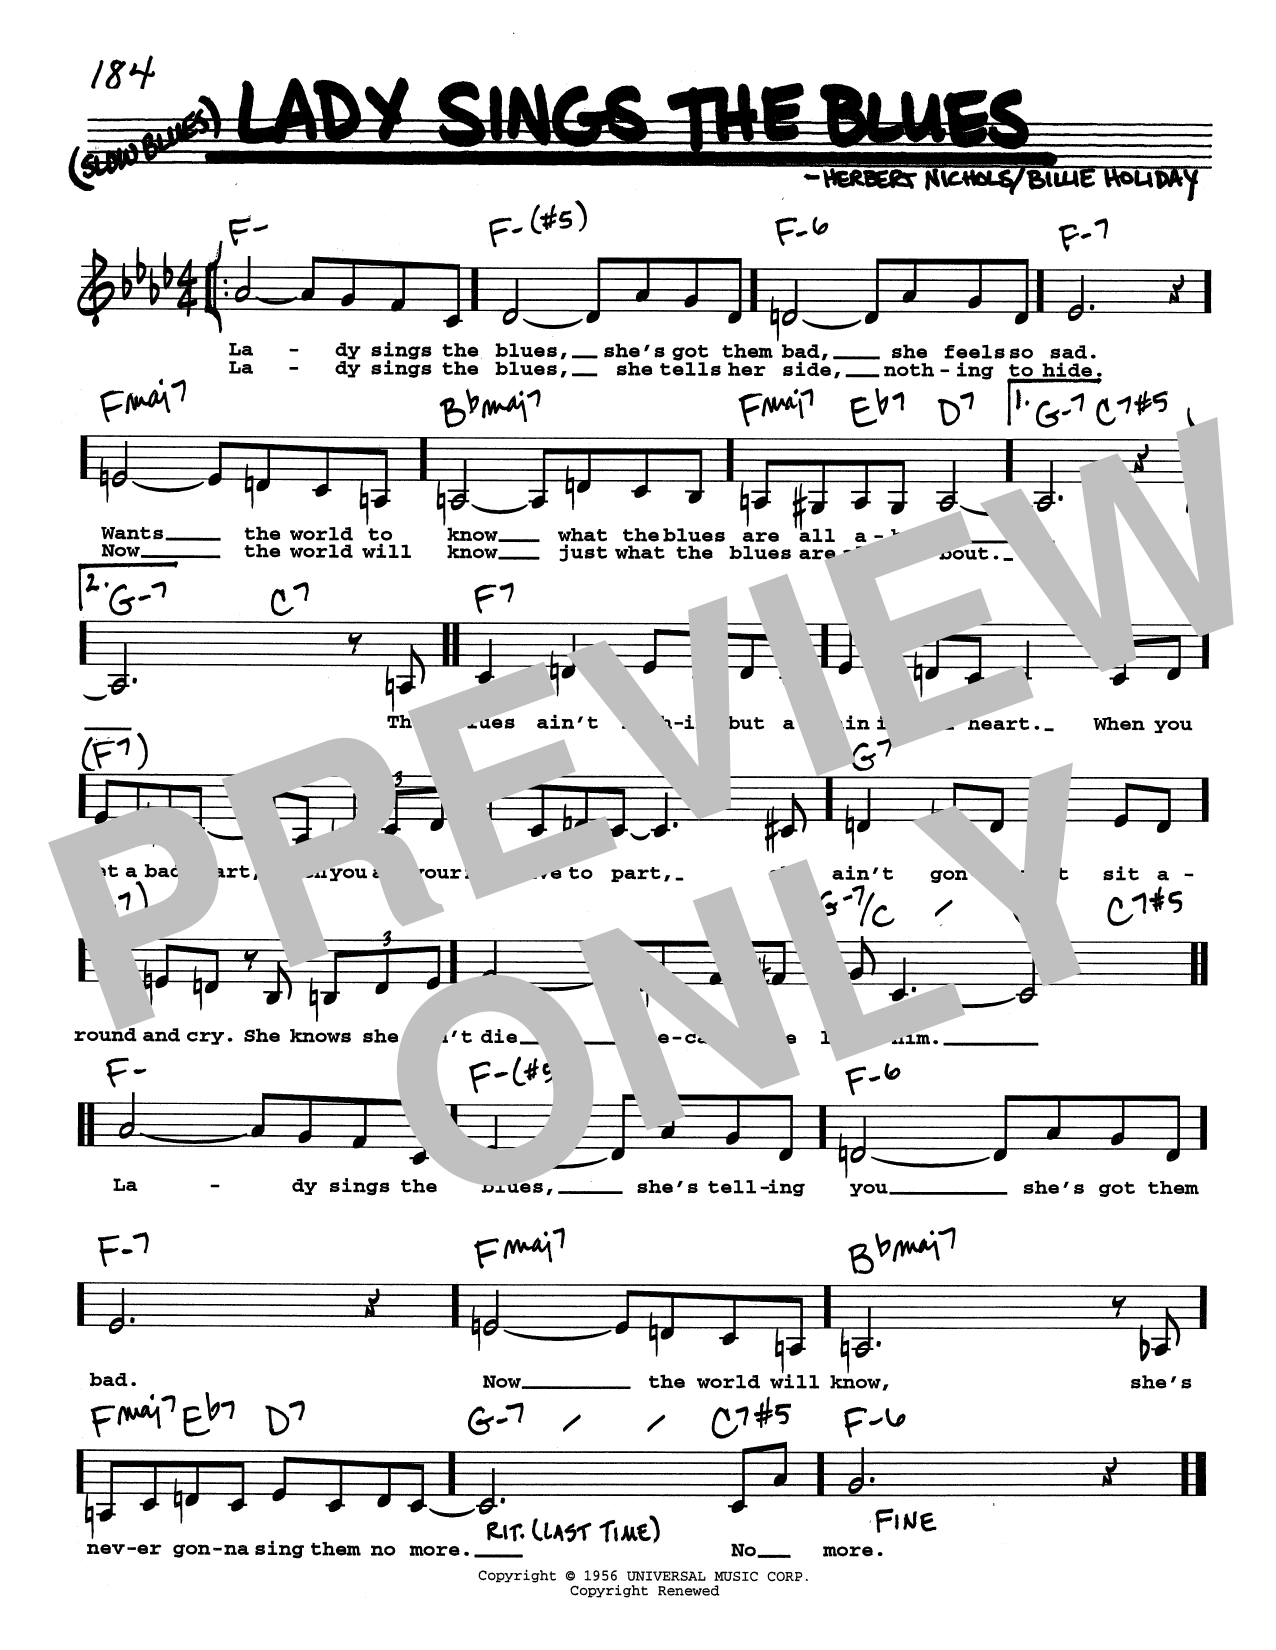 Billie Holiday Lady Sings The Blues (Low Voice) sheet music notes printable PDF score